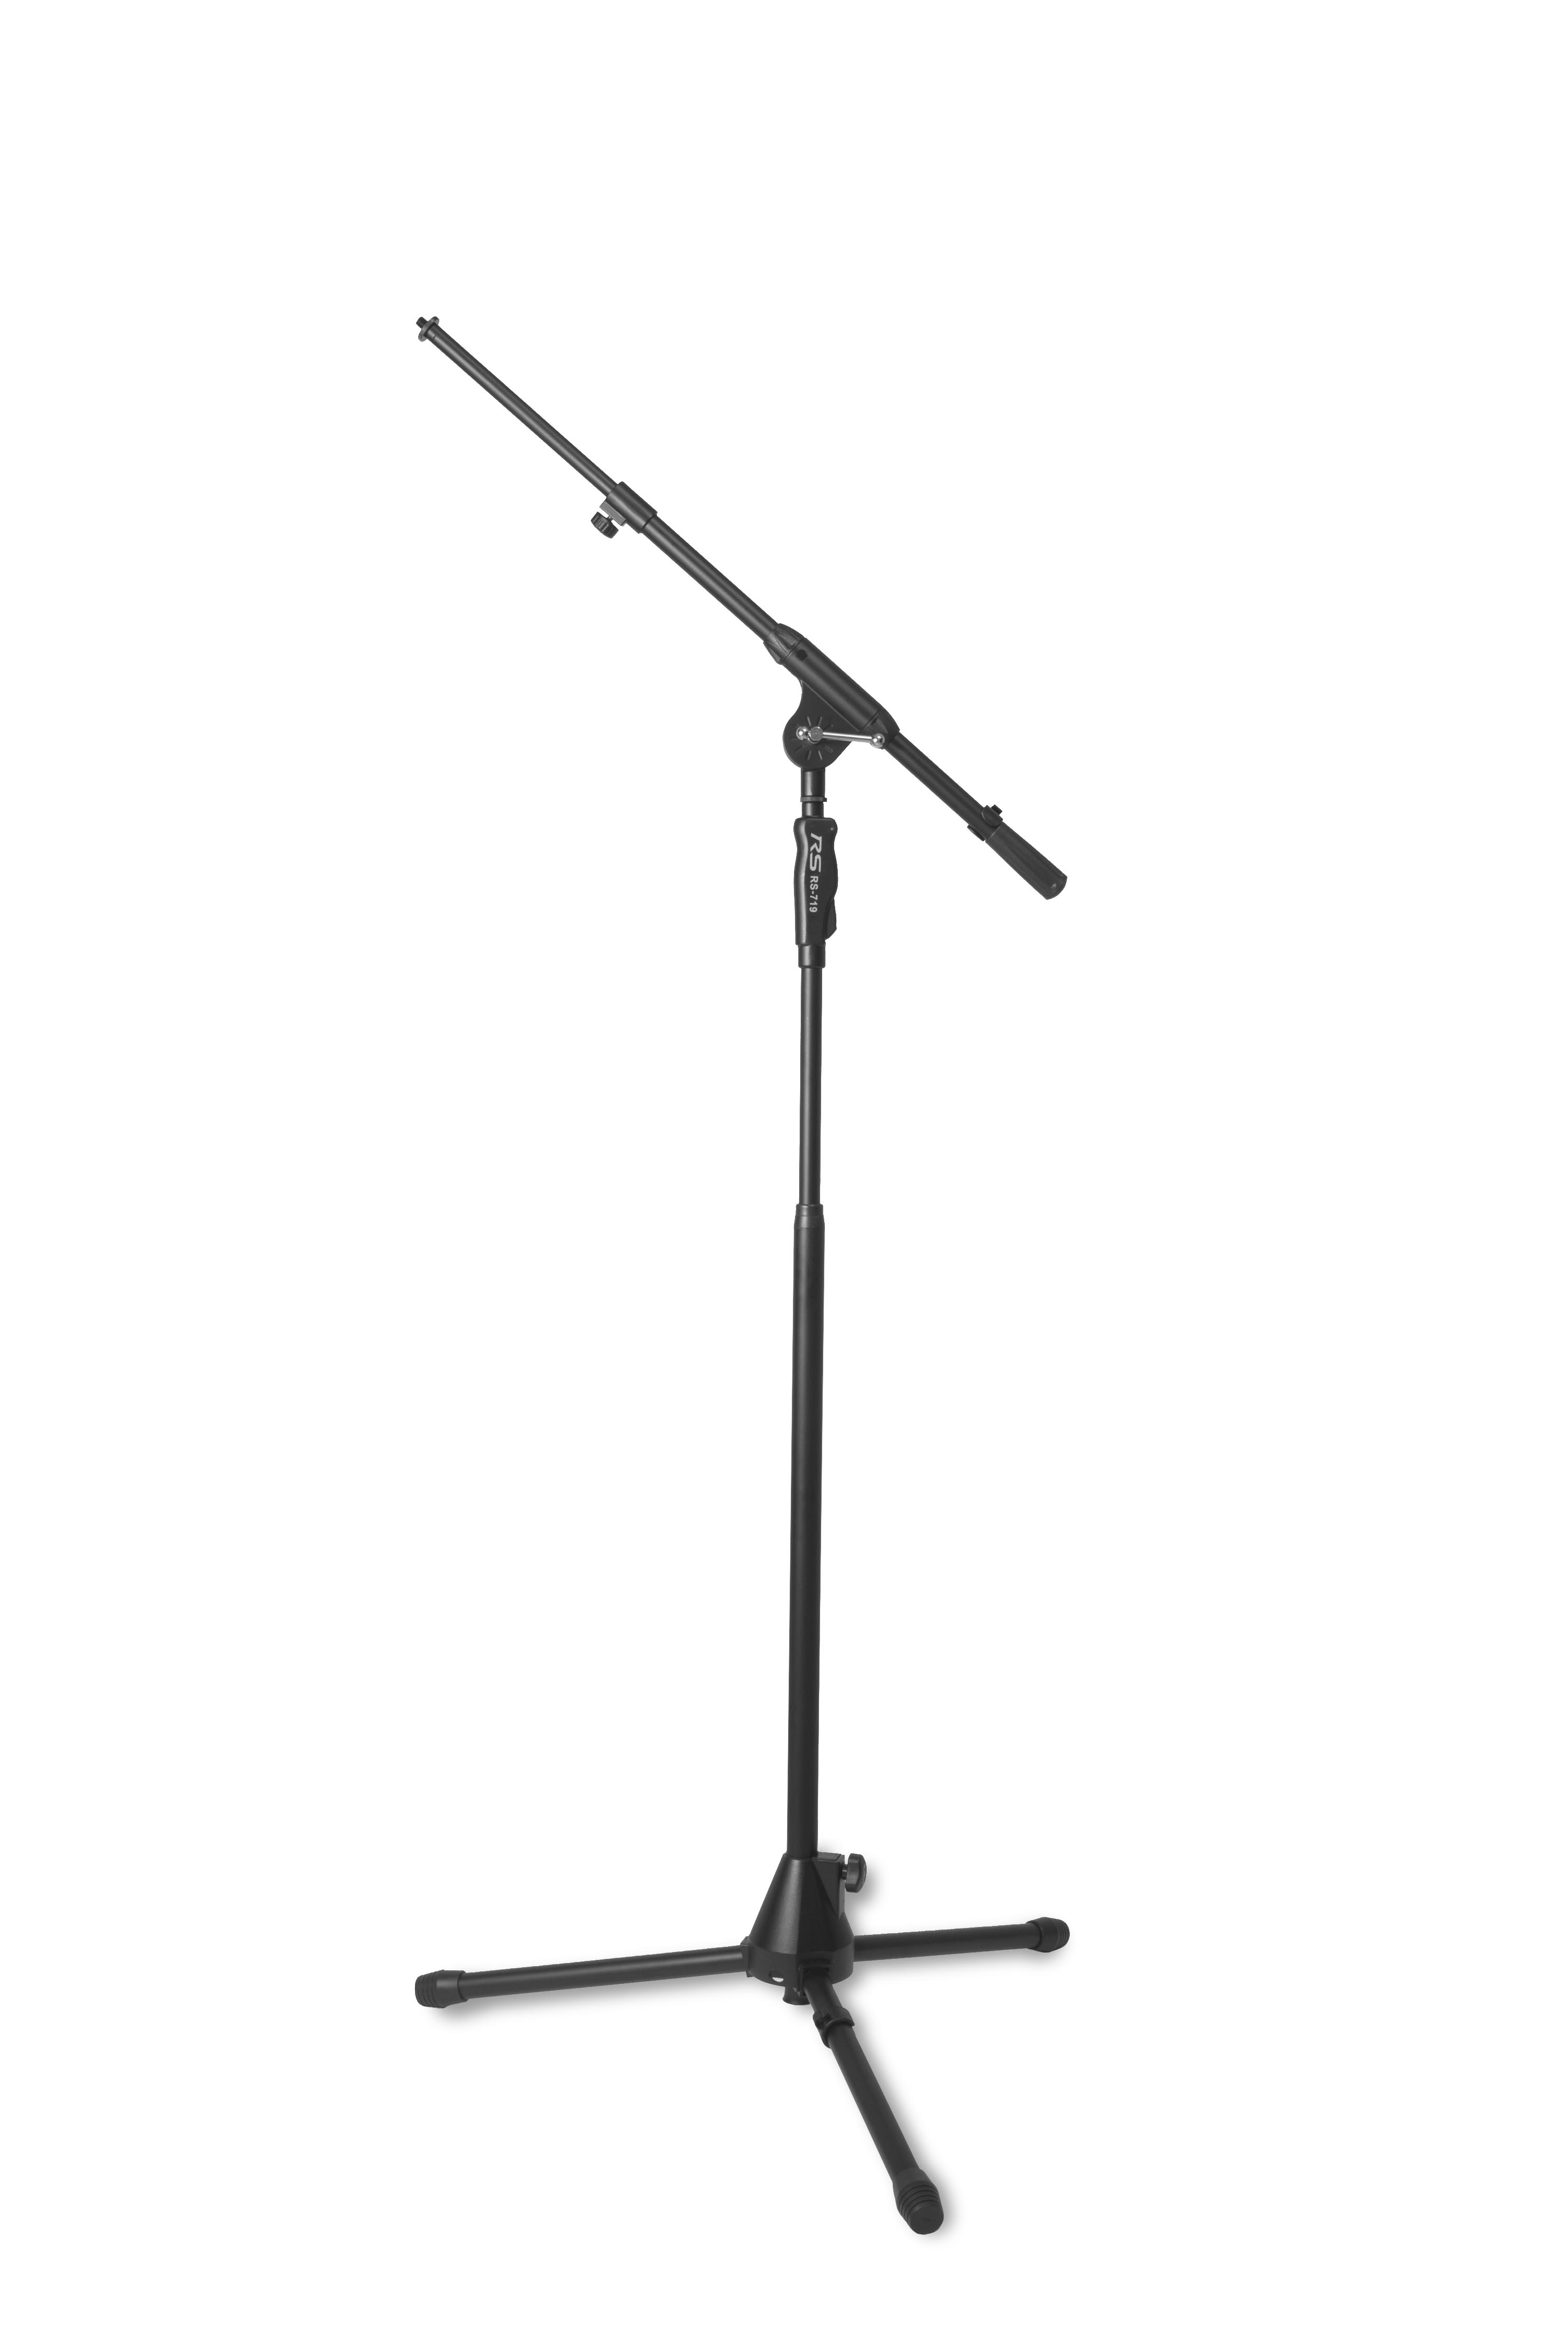 mic with stand png